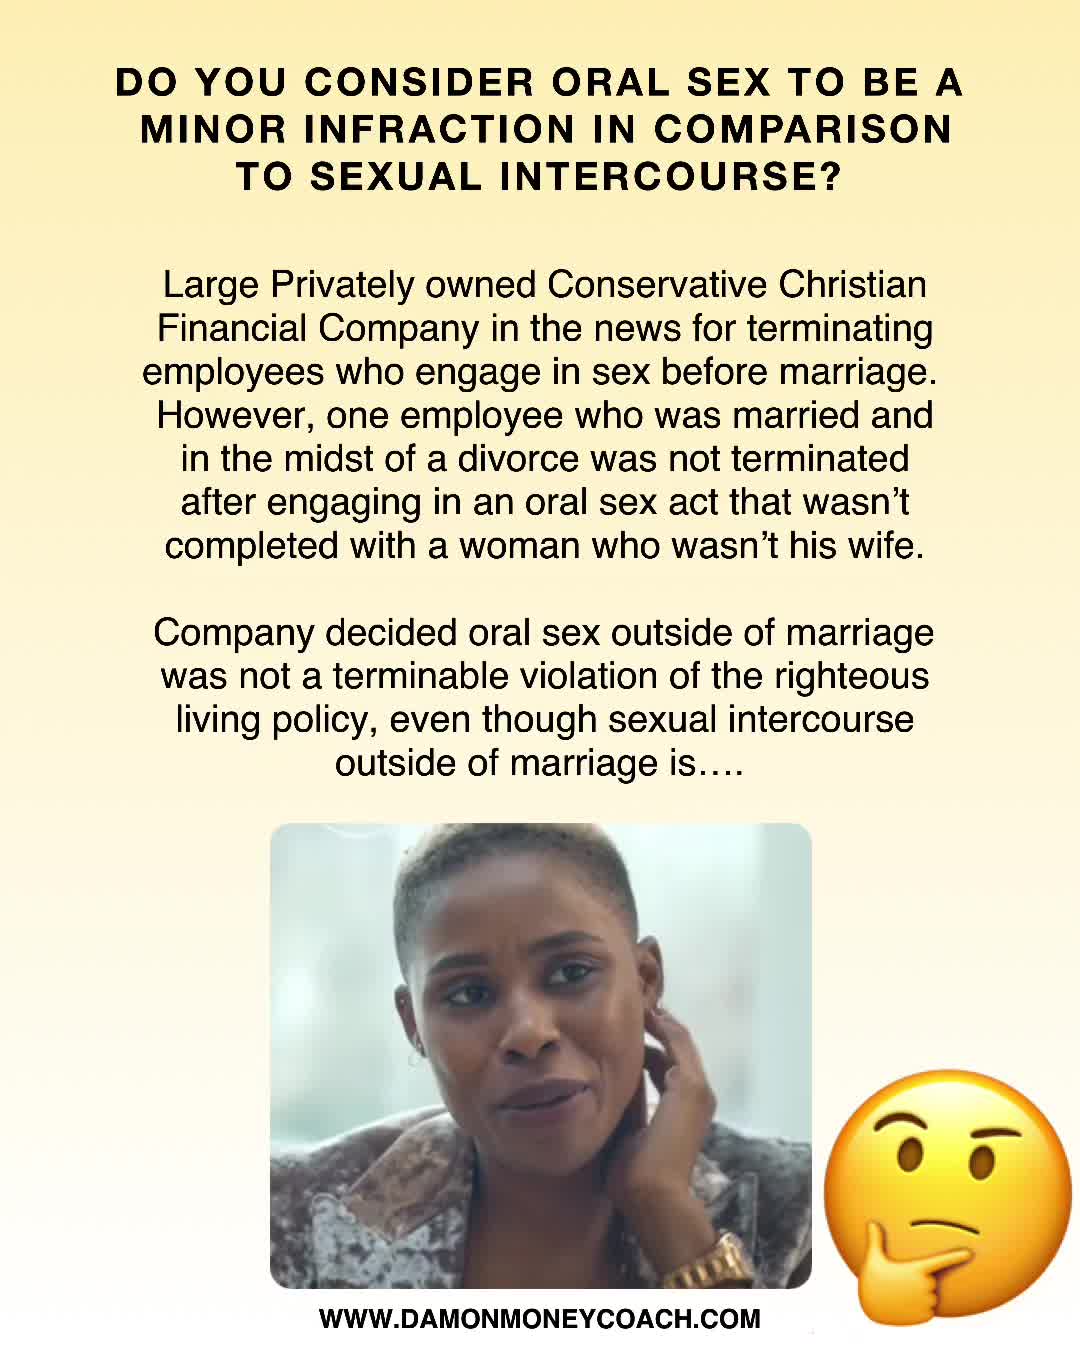 Do you consider oral sex to be a minor infraction in comparison to sexual intercourse? Large Privately owned Conservative Christian Financial Company in the news for terminating employees who engage in photo photo